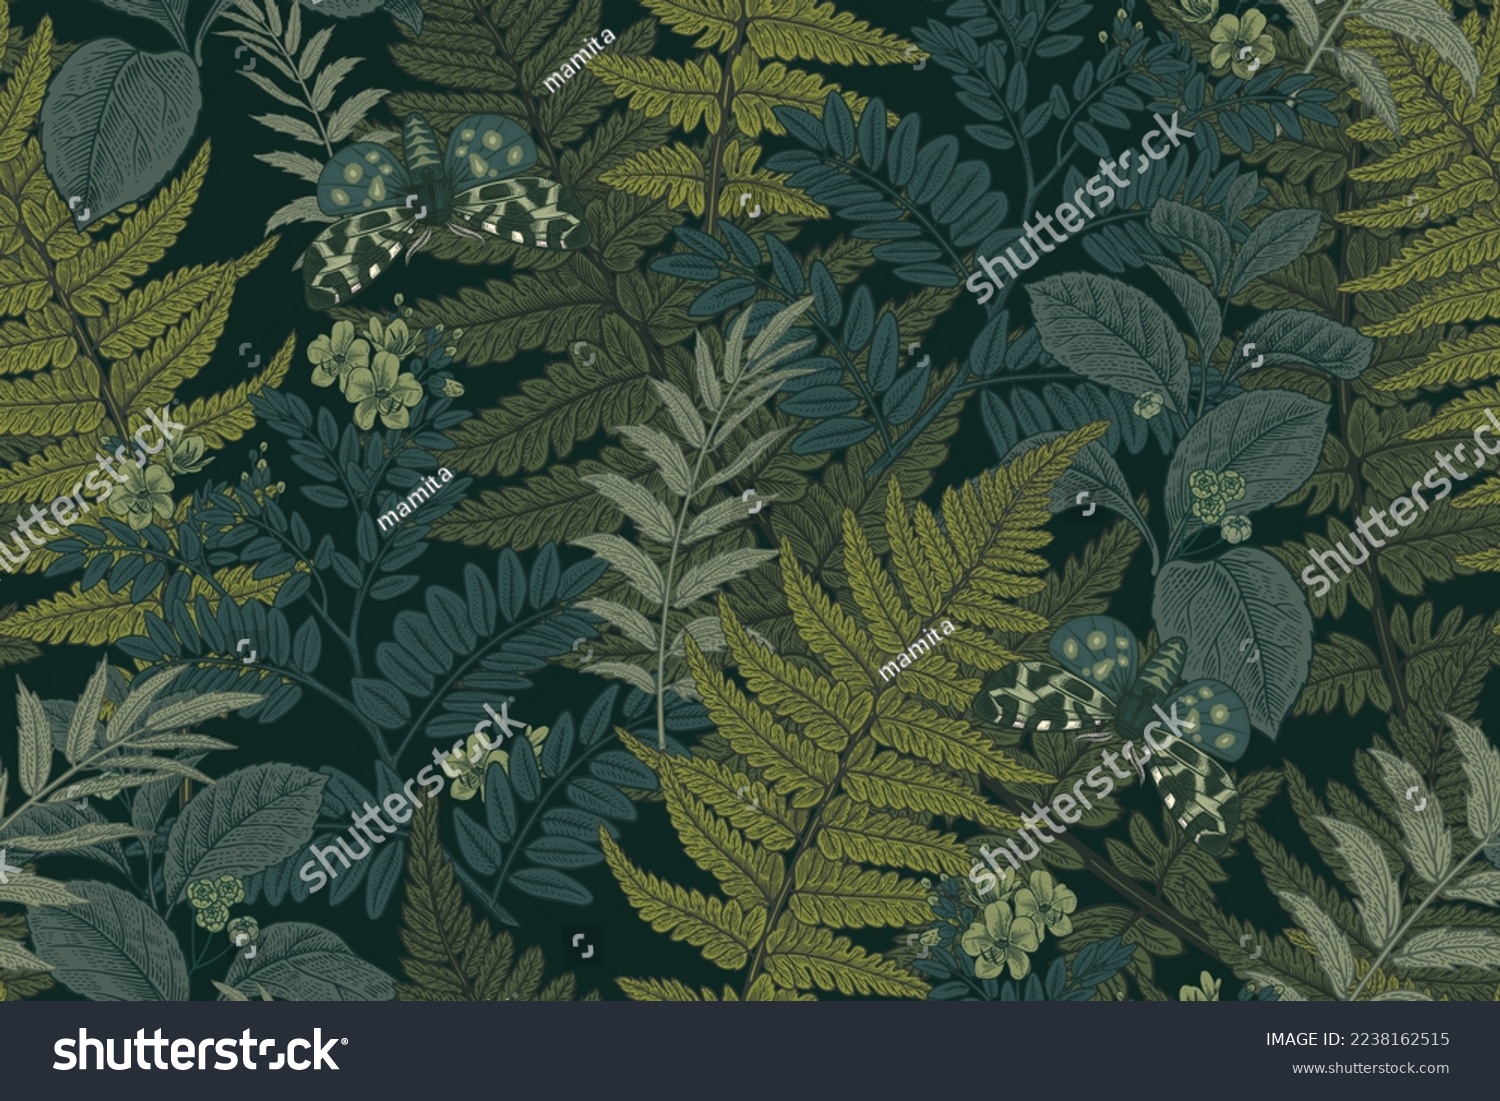 Fern leaves, flowers and night butterflies. Floral seamless pattern. Dark background. Vector illustration. Vintage engraving. Template for textile, wallpaper, paper. #2238162515